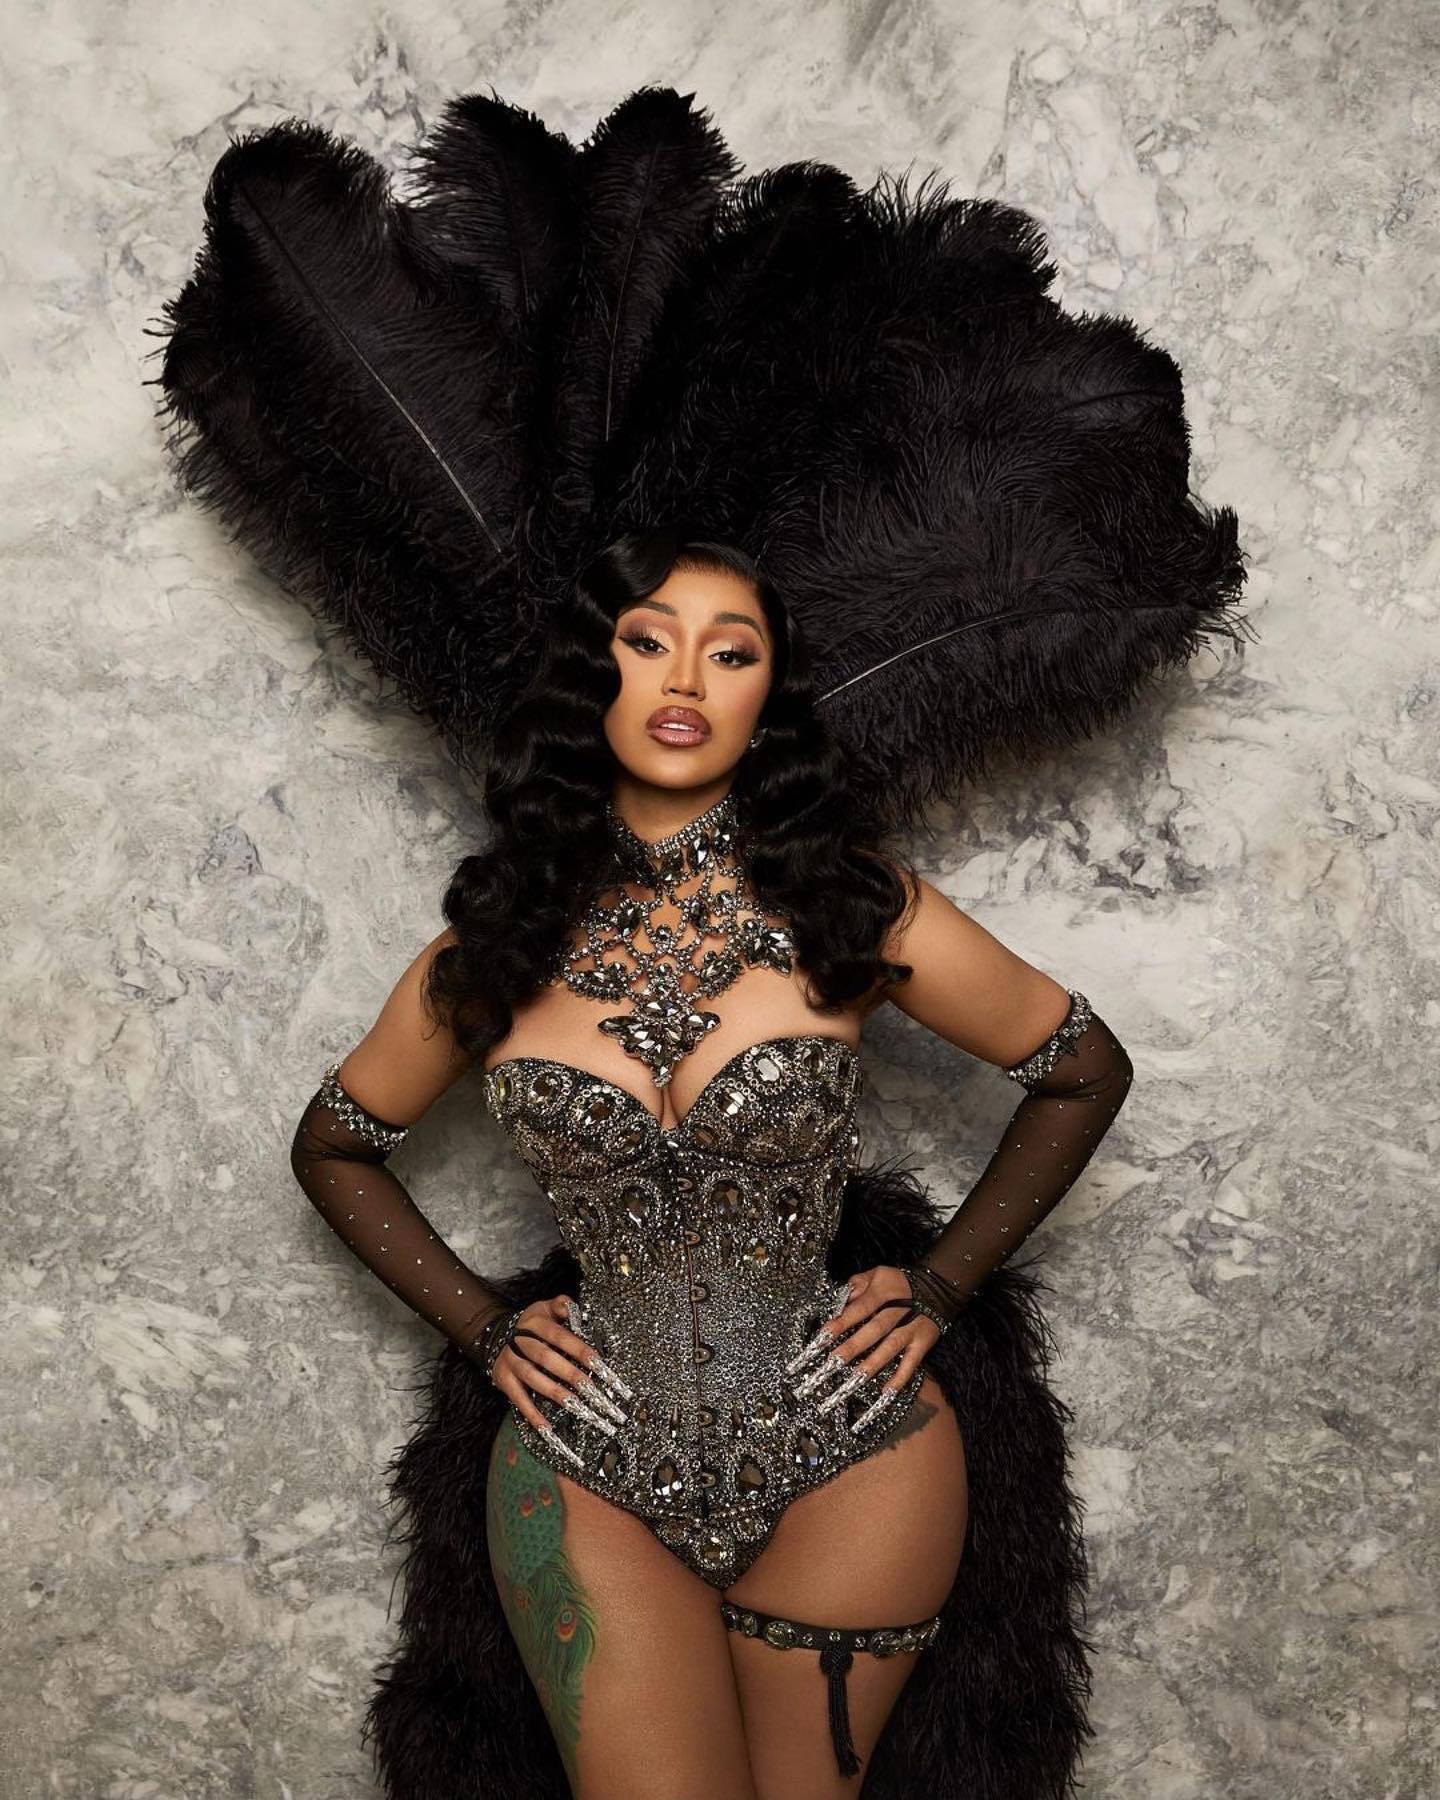 The Look That Almost Was: Cardi B Reveals a Second Burlesque Look